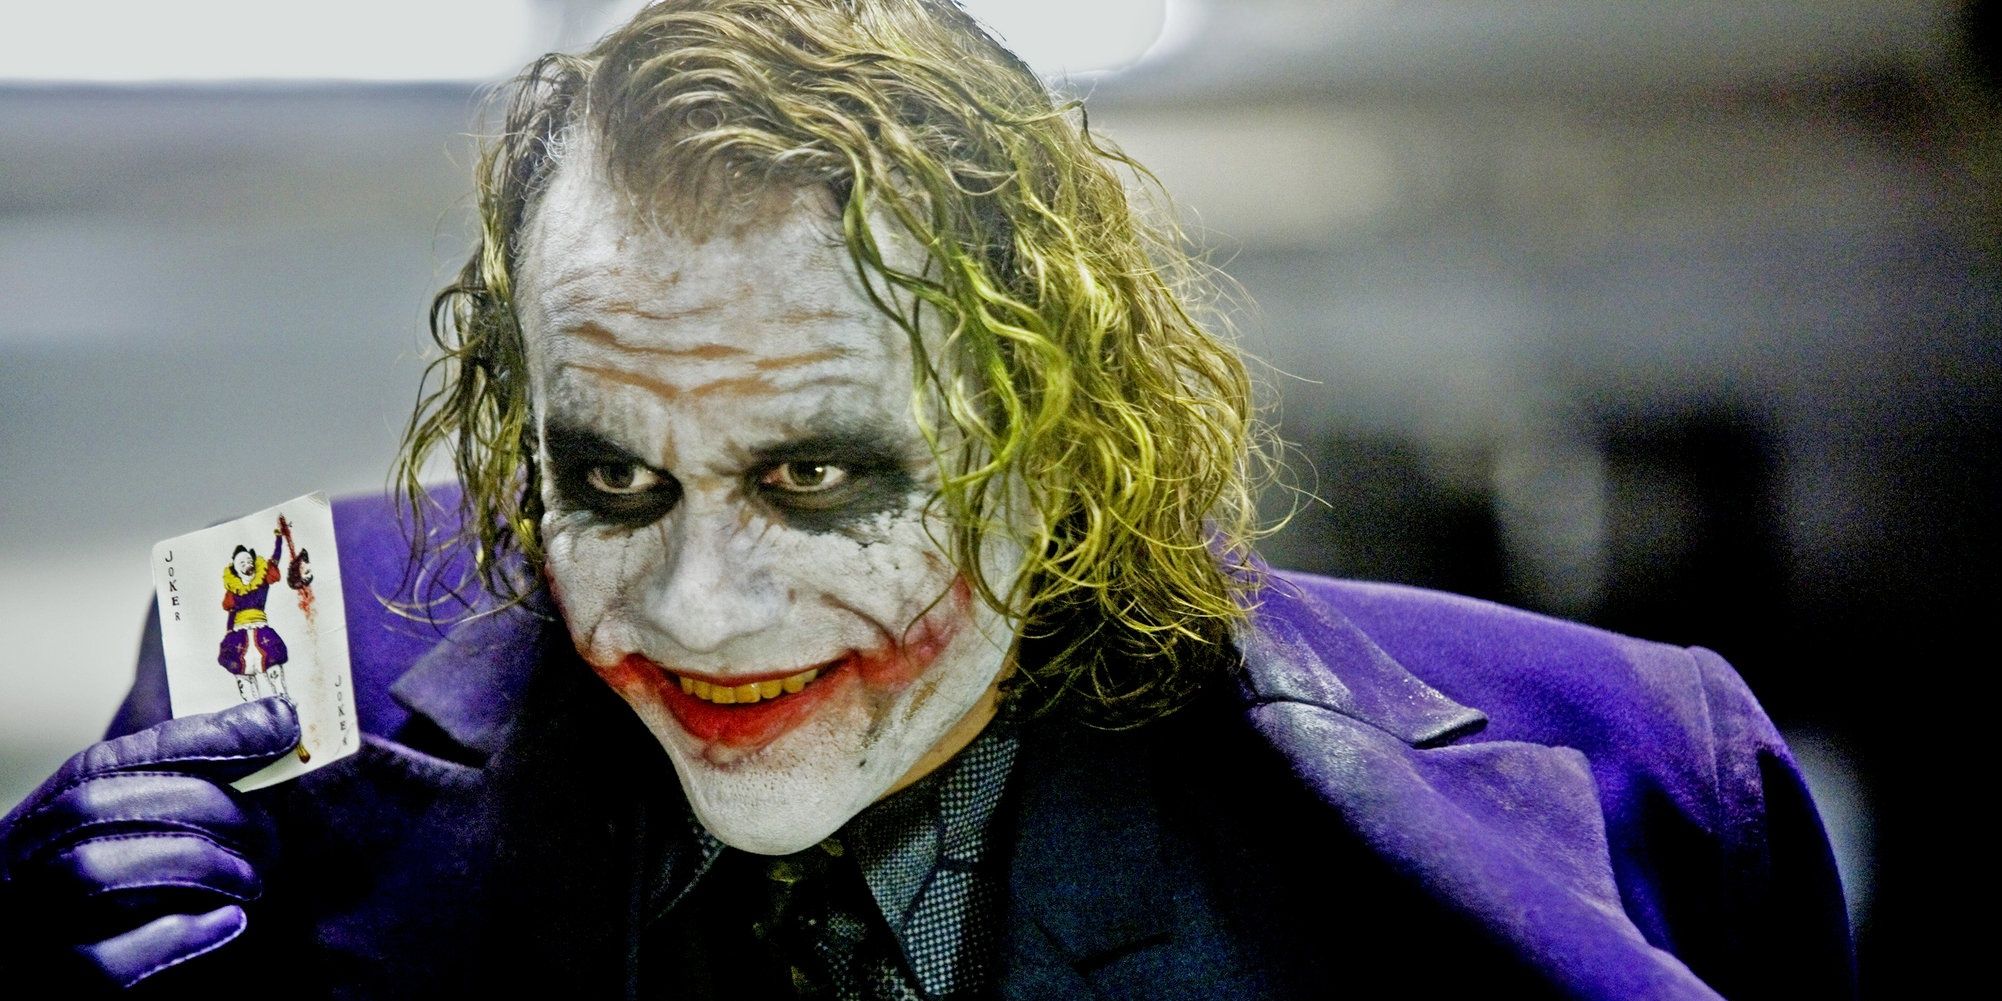 The Joker holding up a playing card